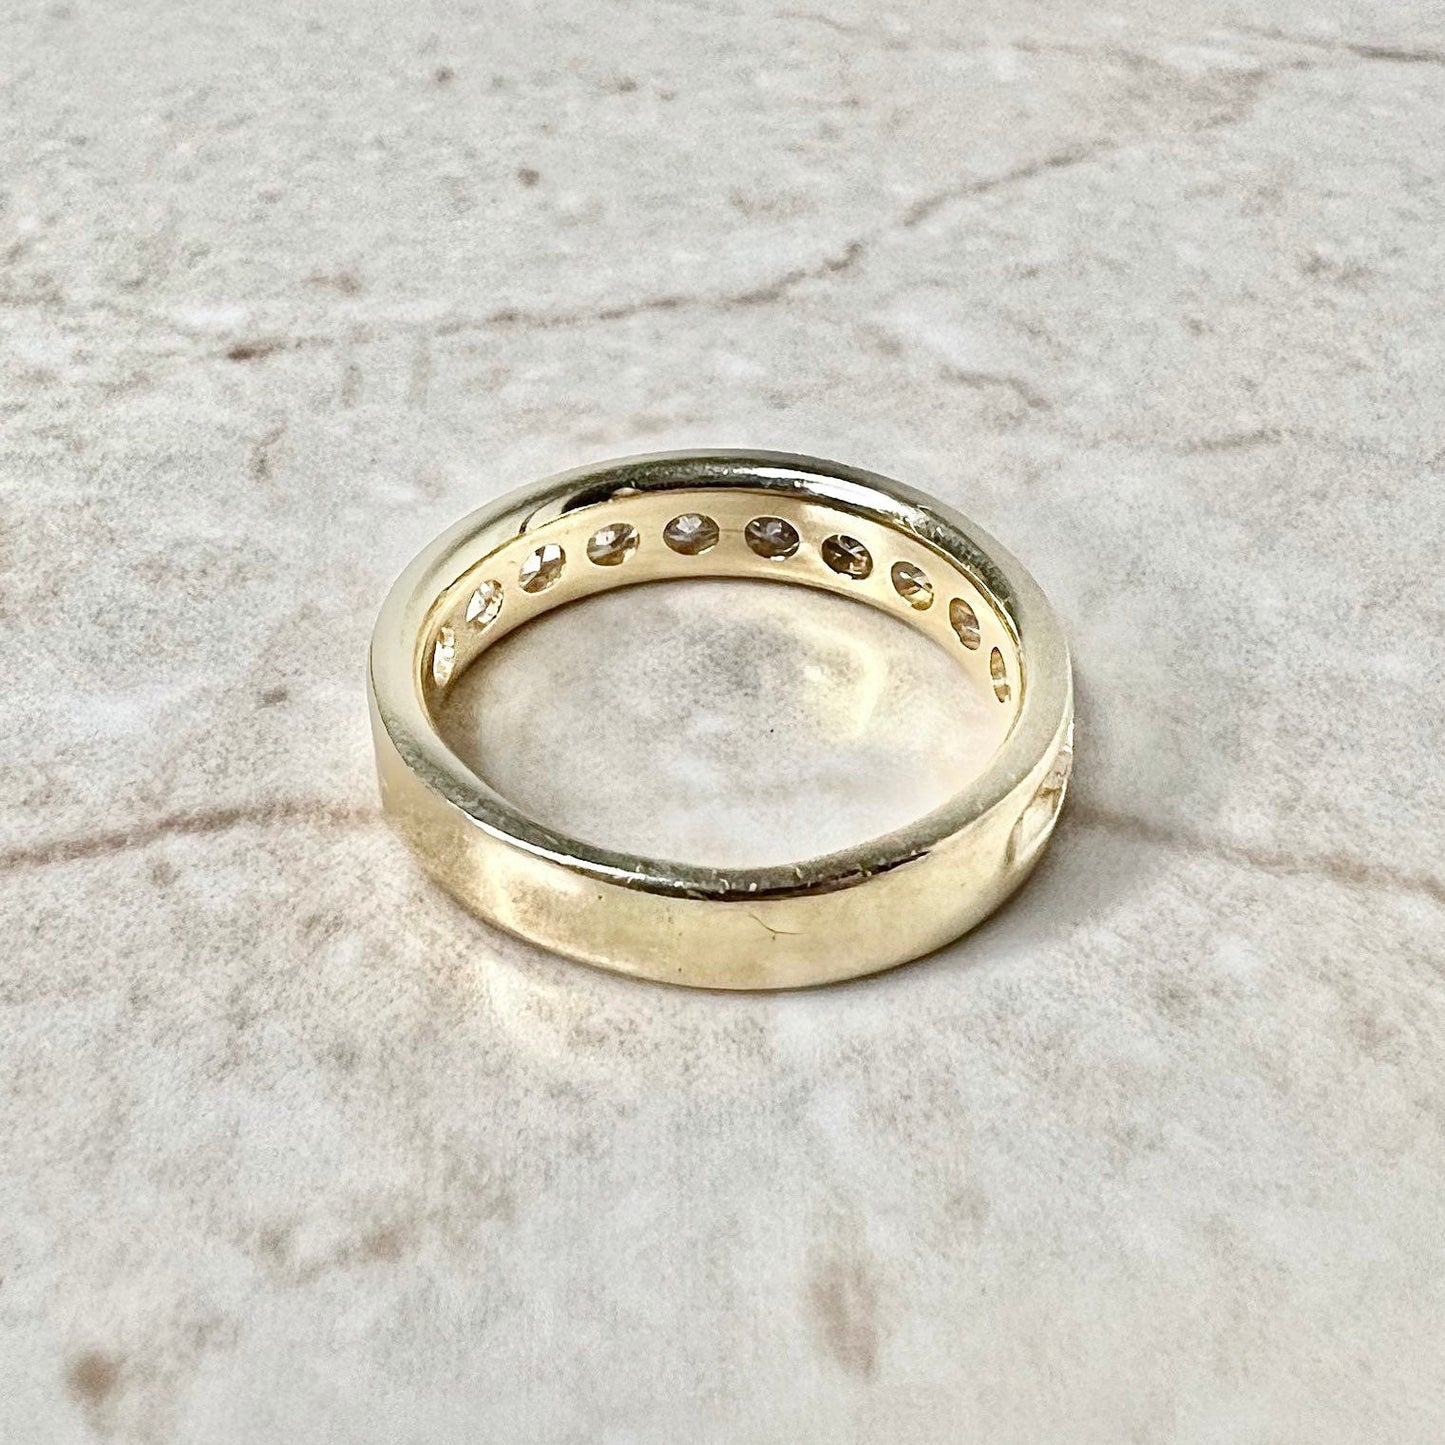 1 CT 14K Half Eternity Diamond Band Ring - Yellow Gold Eternity Ring - Diamond Ring -Anniversary Ring - Wedding Ring - Best Gift For Her